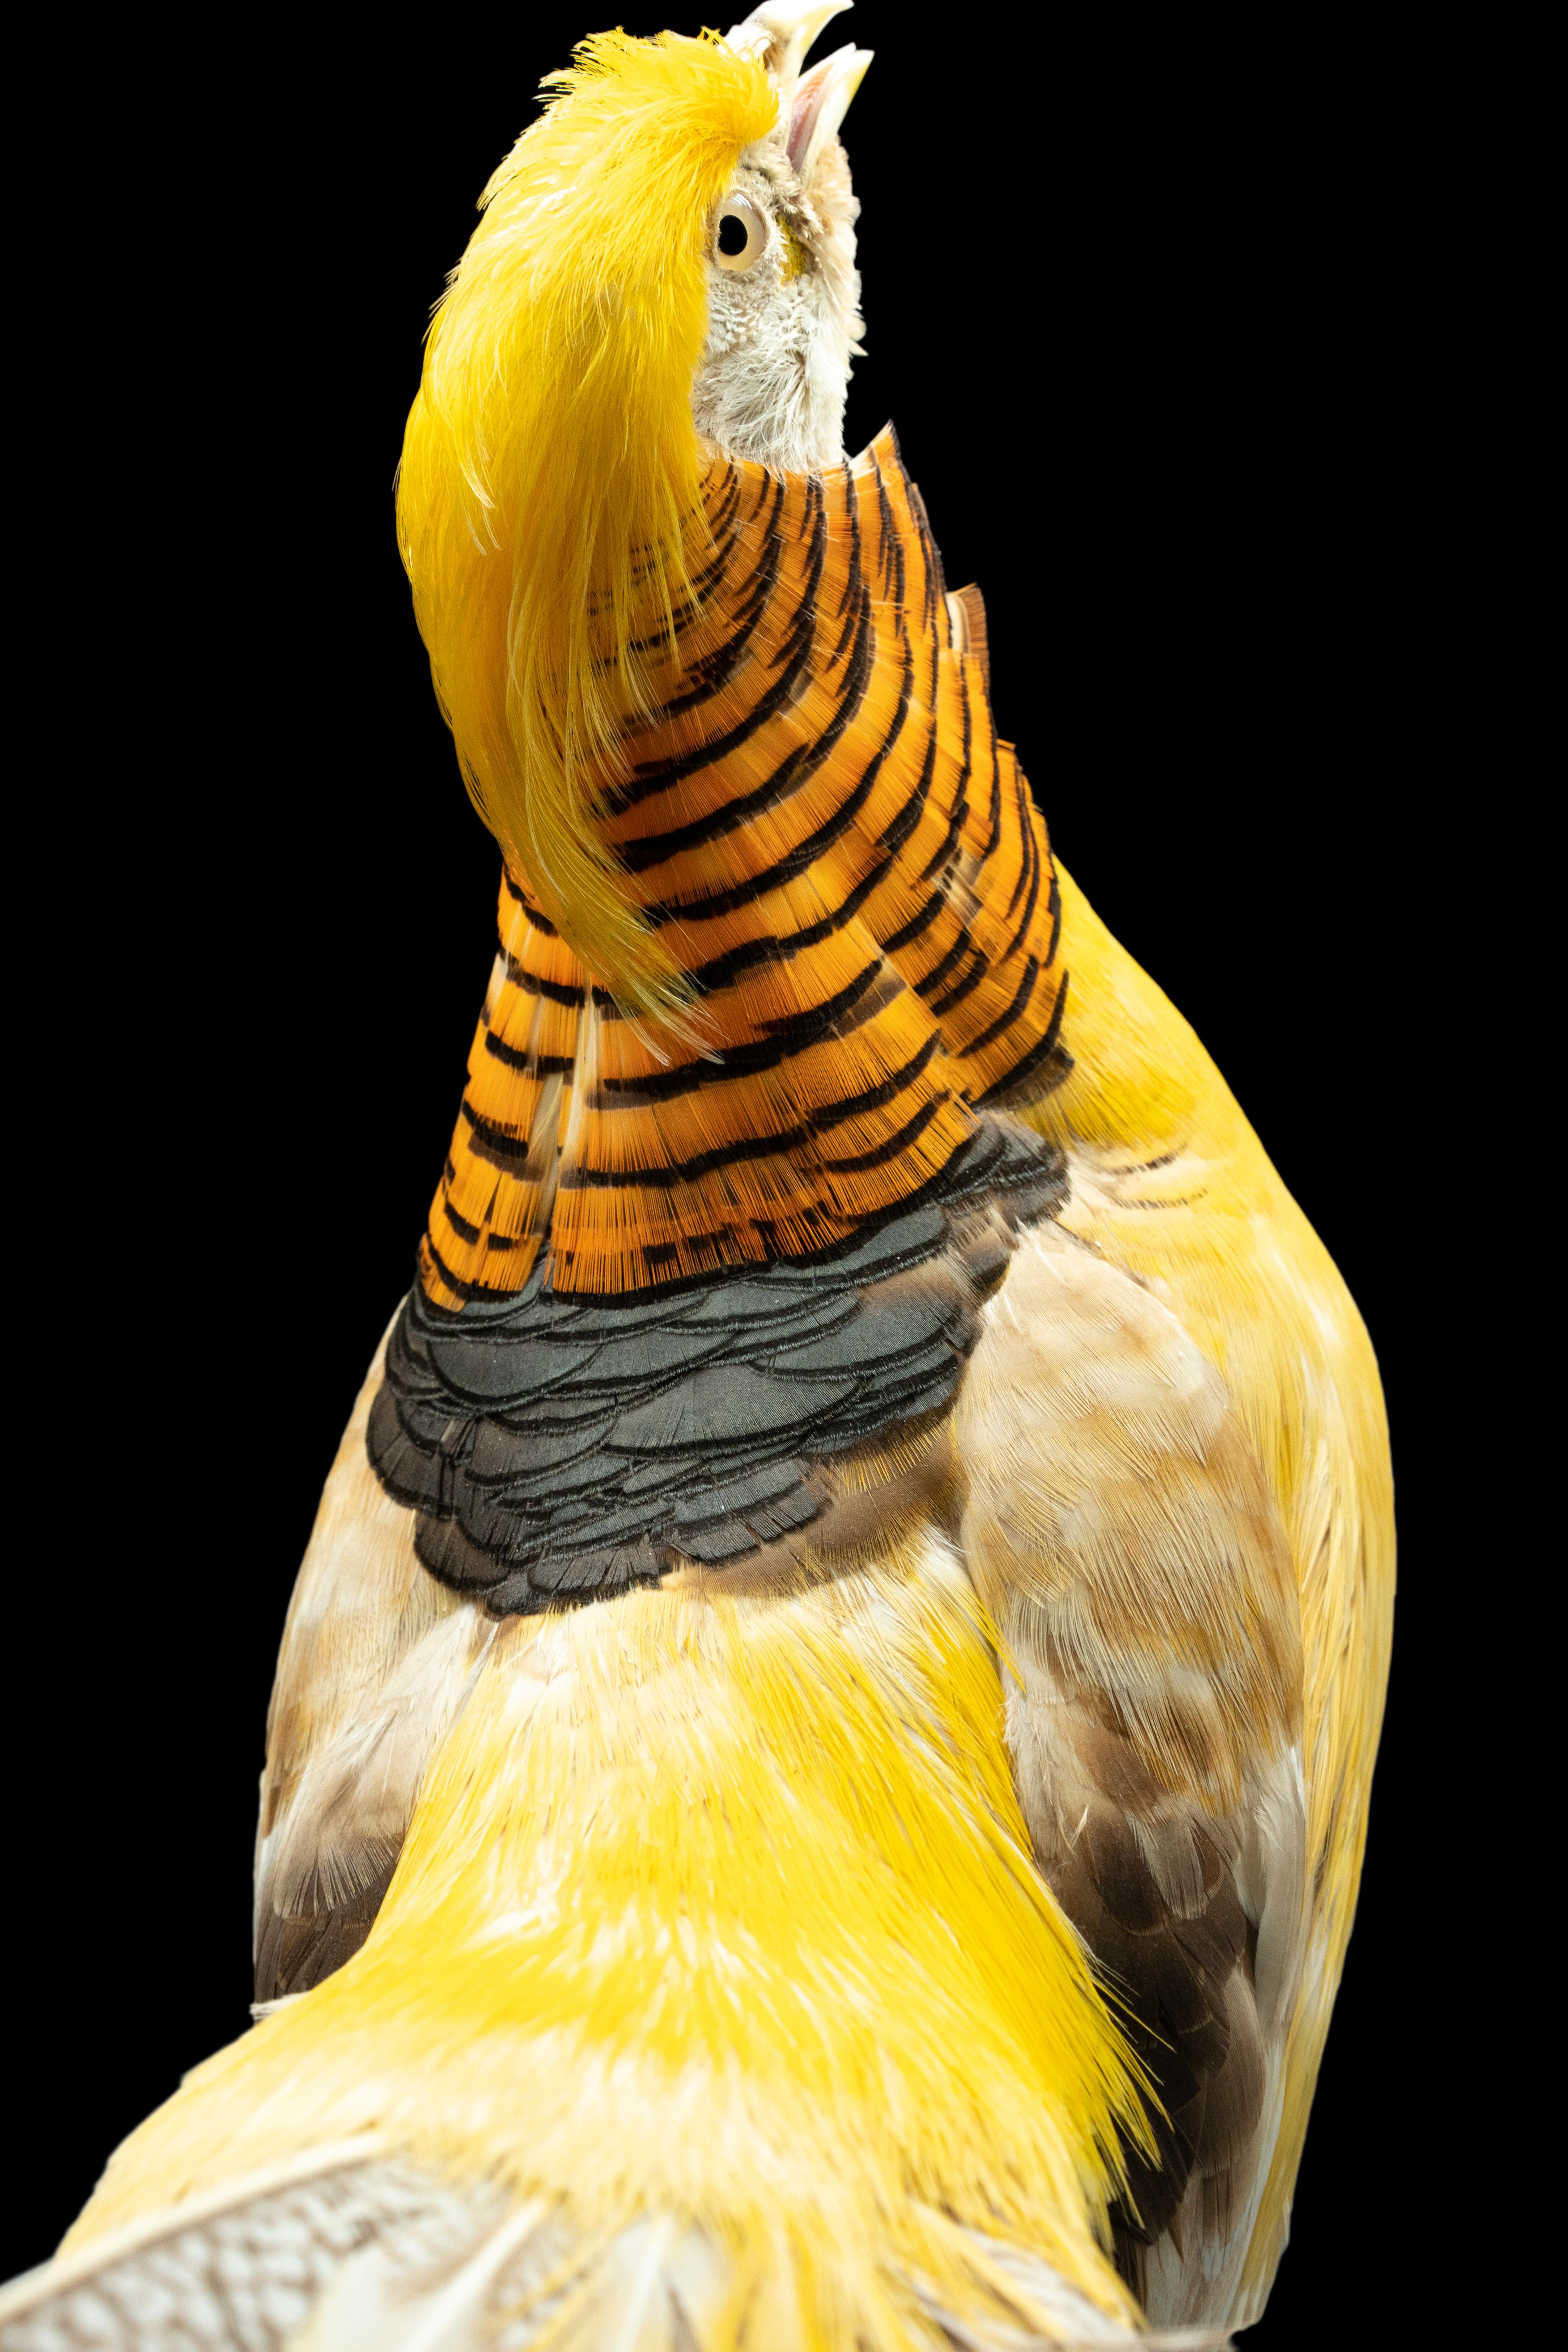 This Yellow Golden pheasant's perched pose is the perfect way to showcase all of those amazing feathers, it's a wonderful addition to any collection, perfect for town or country.